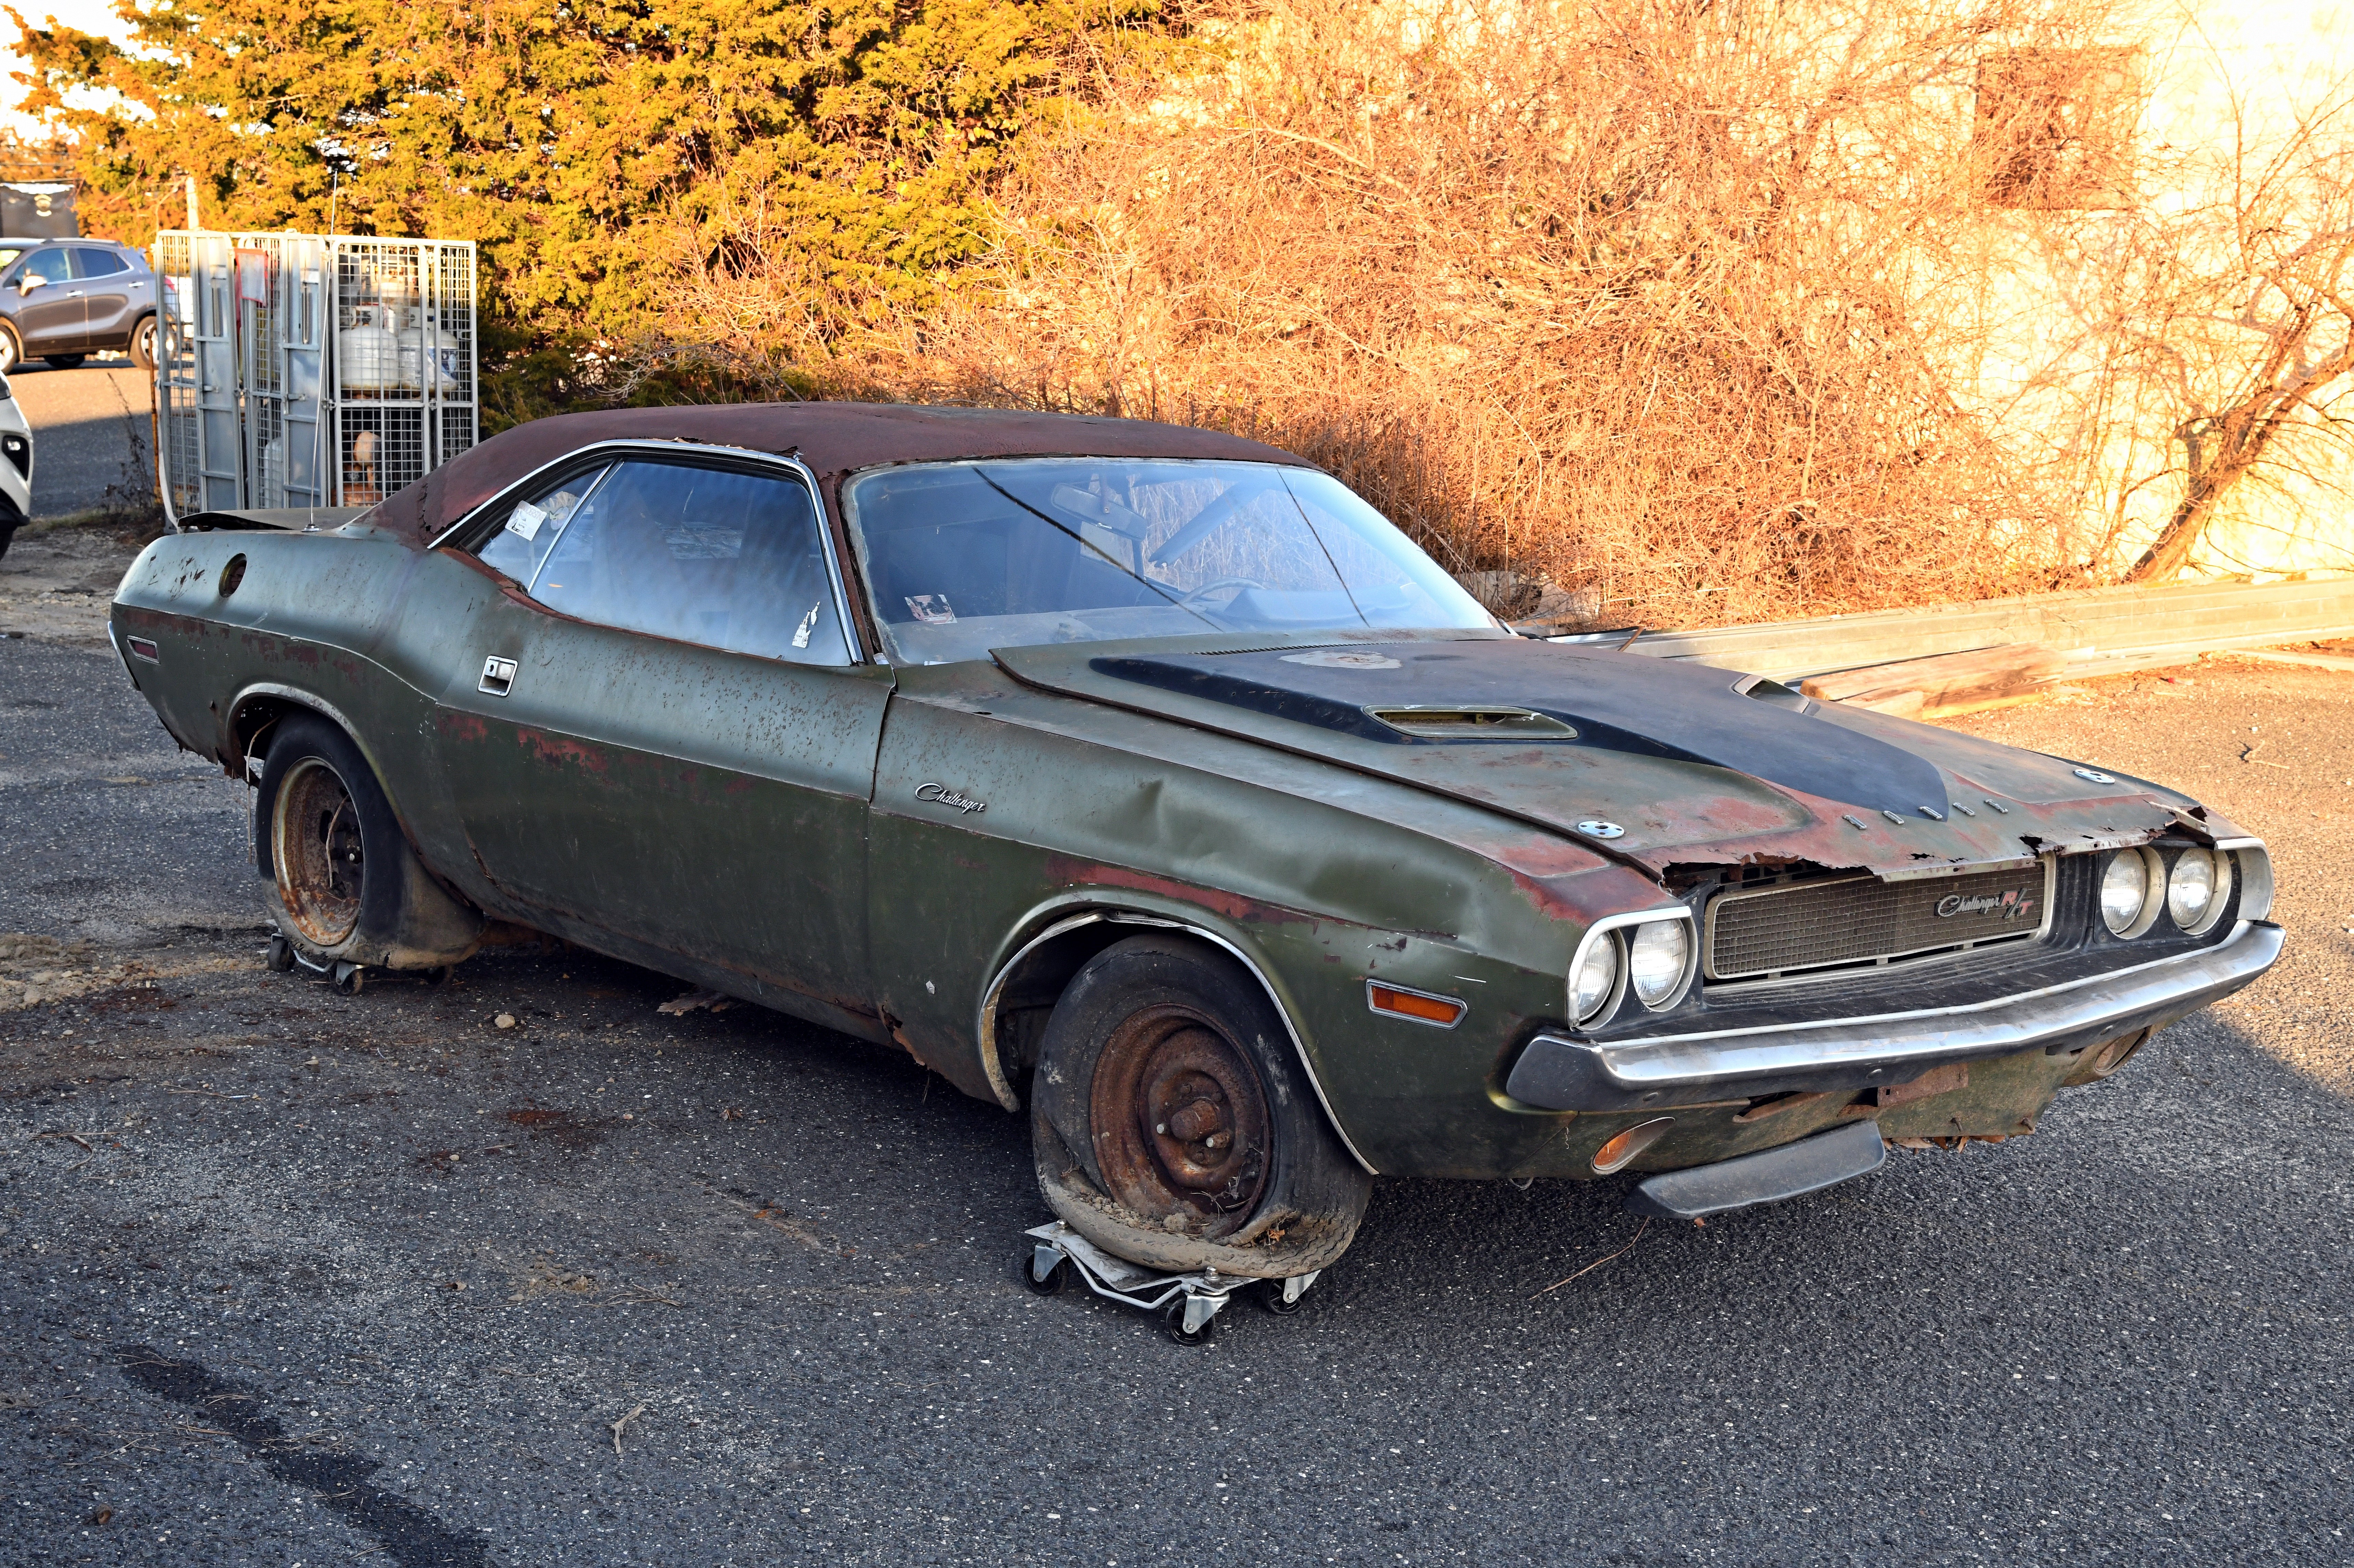 Unearthed: Crusty 1970 Dodge Challenger RT with a Six-Pack Surprise